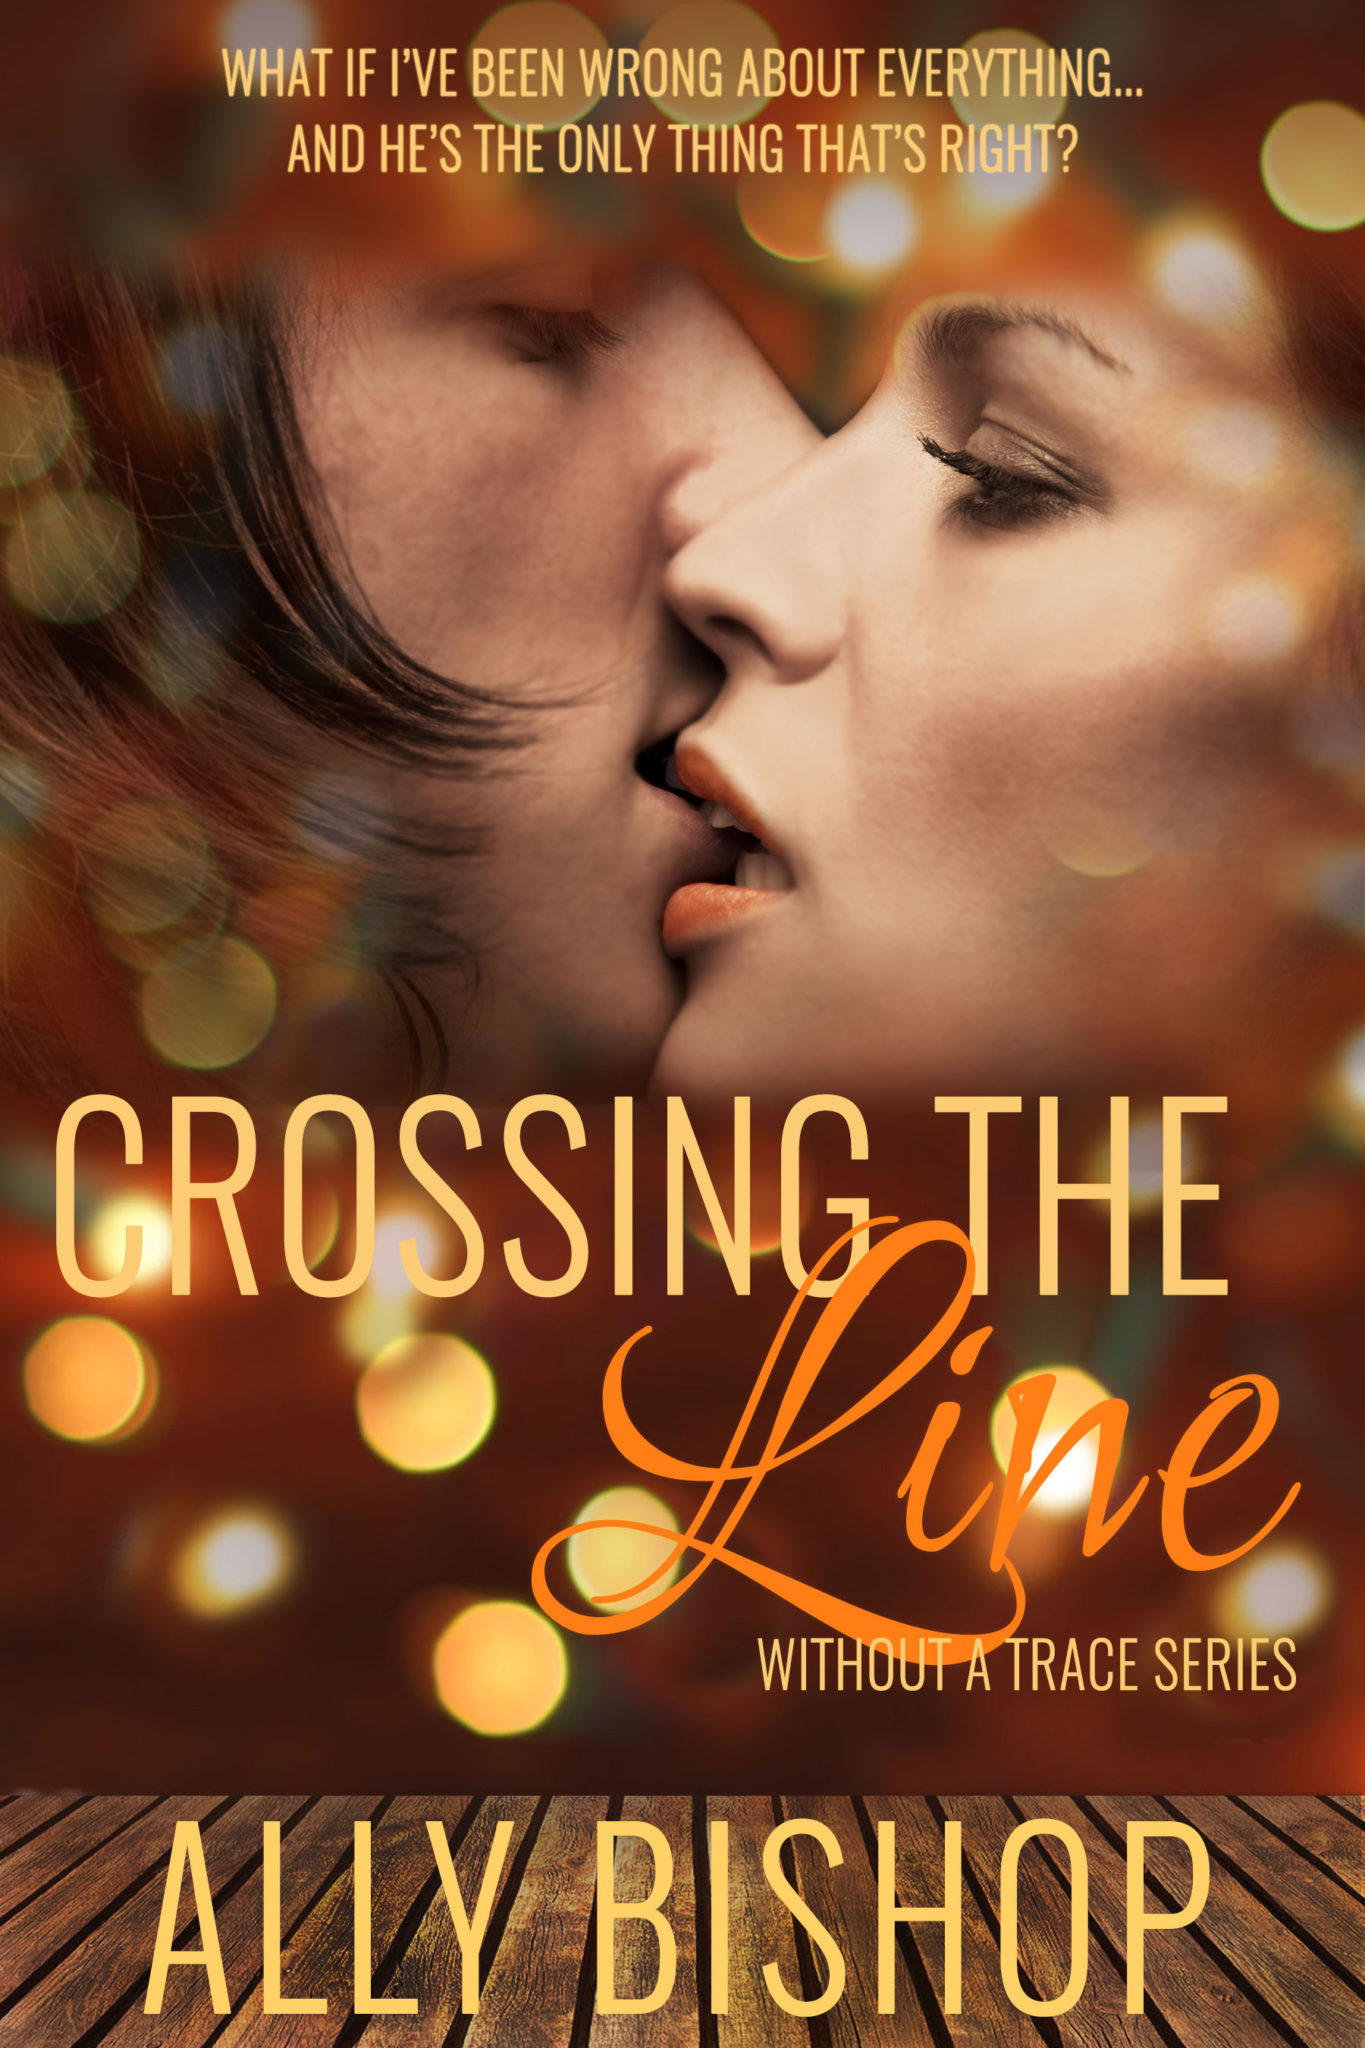 FREE: Crossing the Line by Ally Bishop